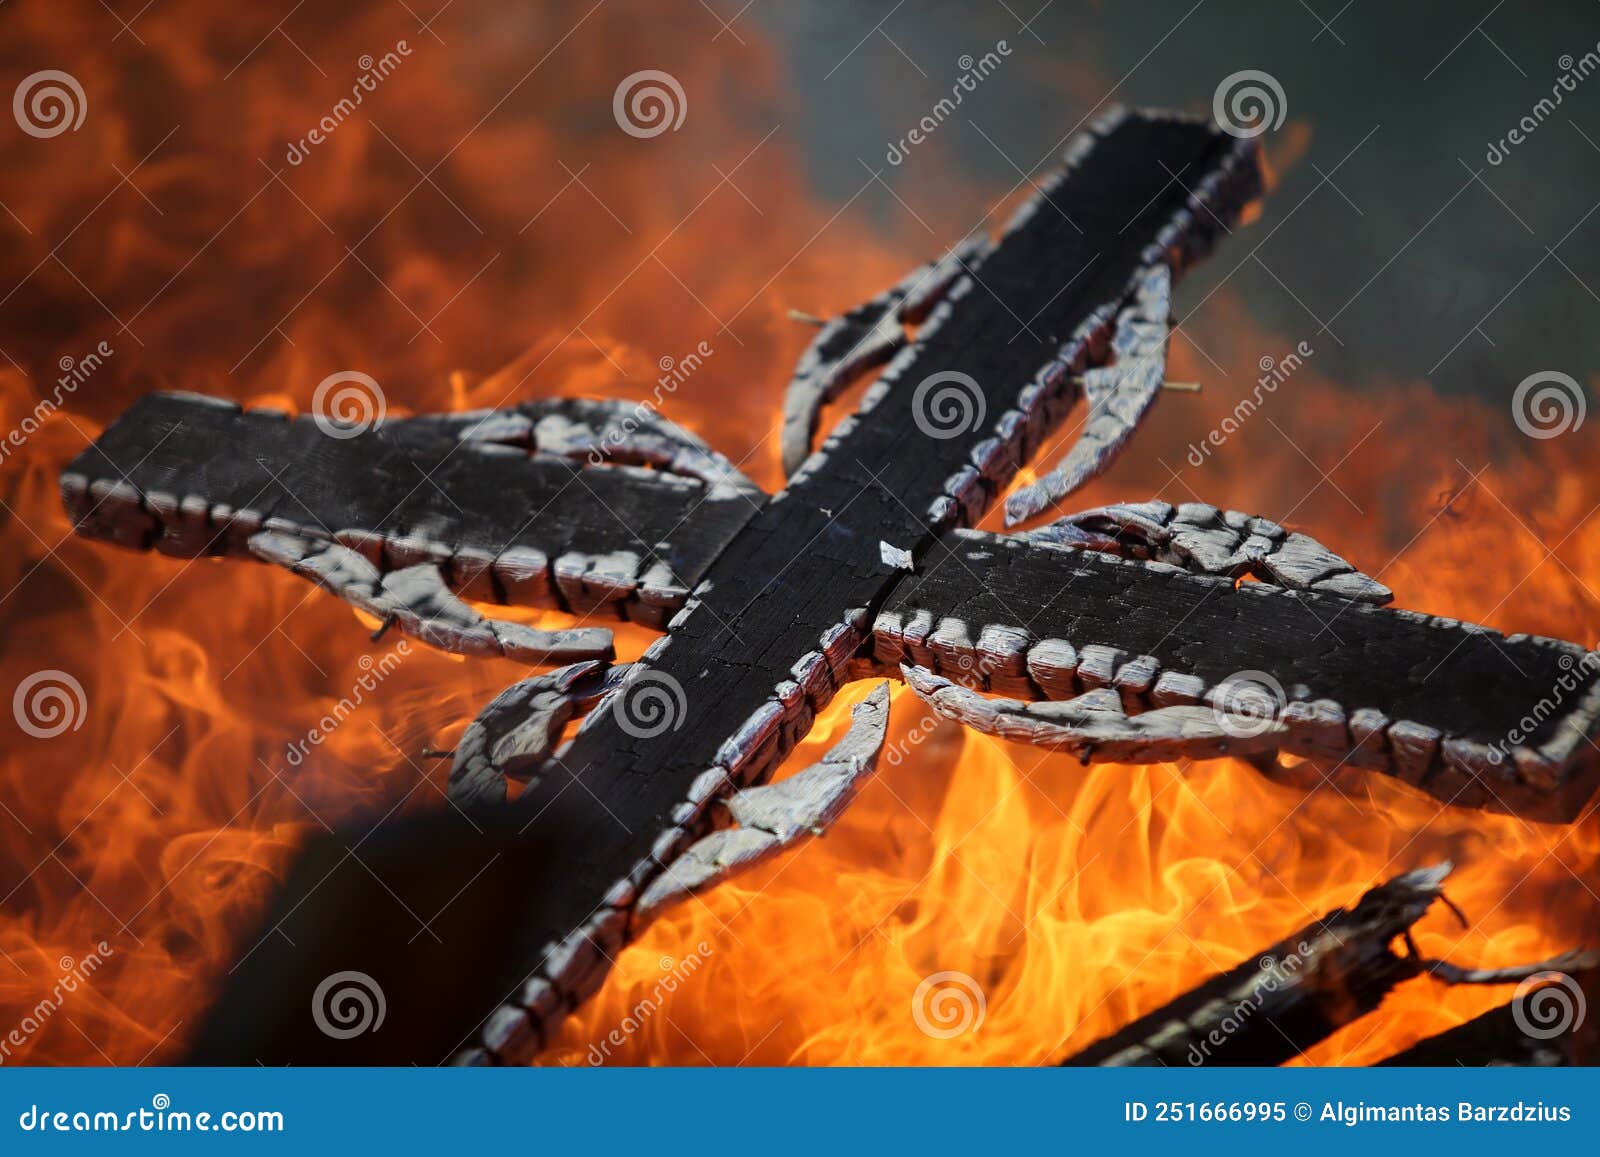 Ancient Traditions of Burning Bonfires in Cemeteries, when Old Crosses ...